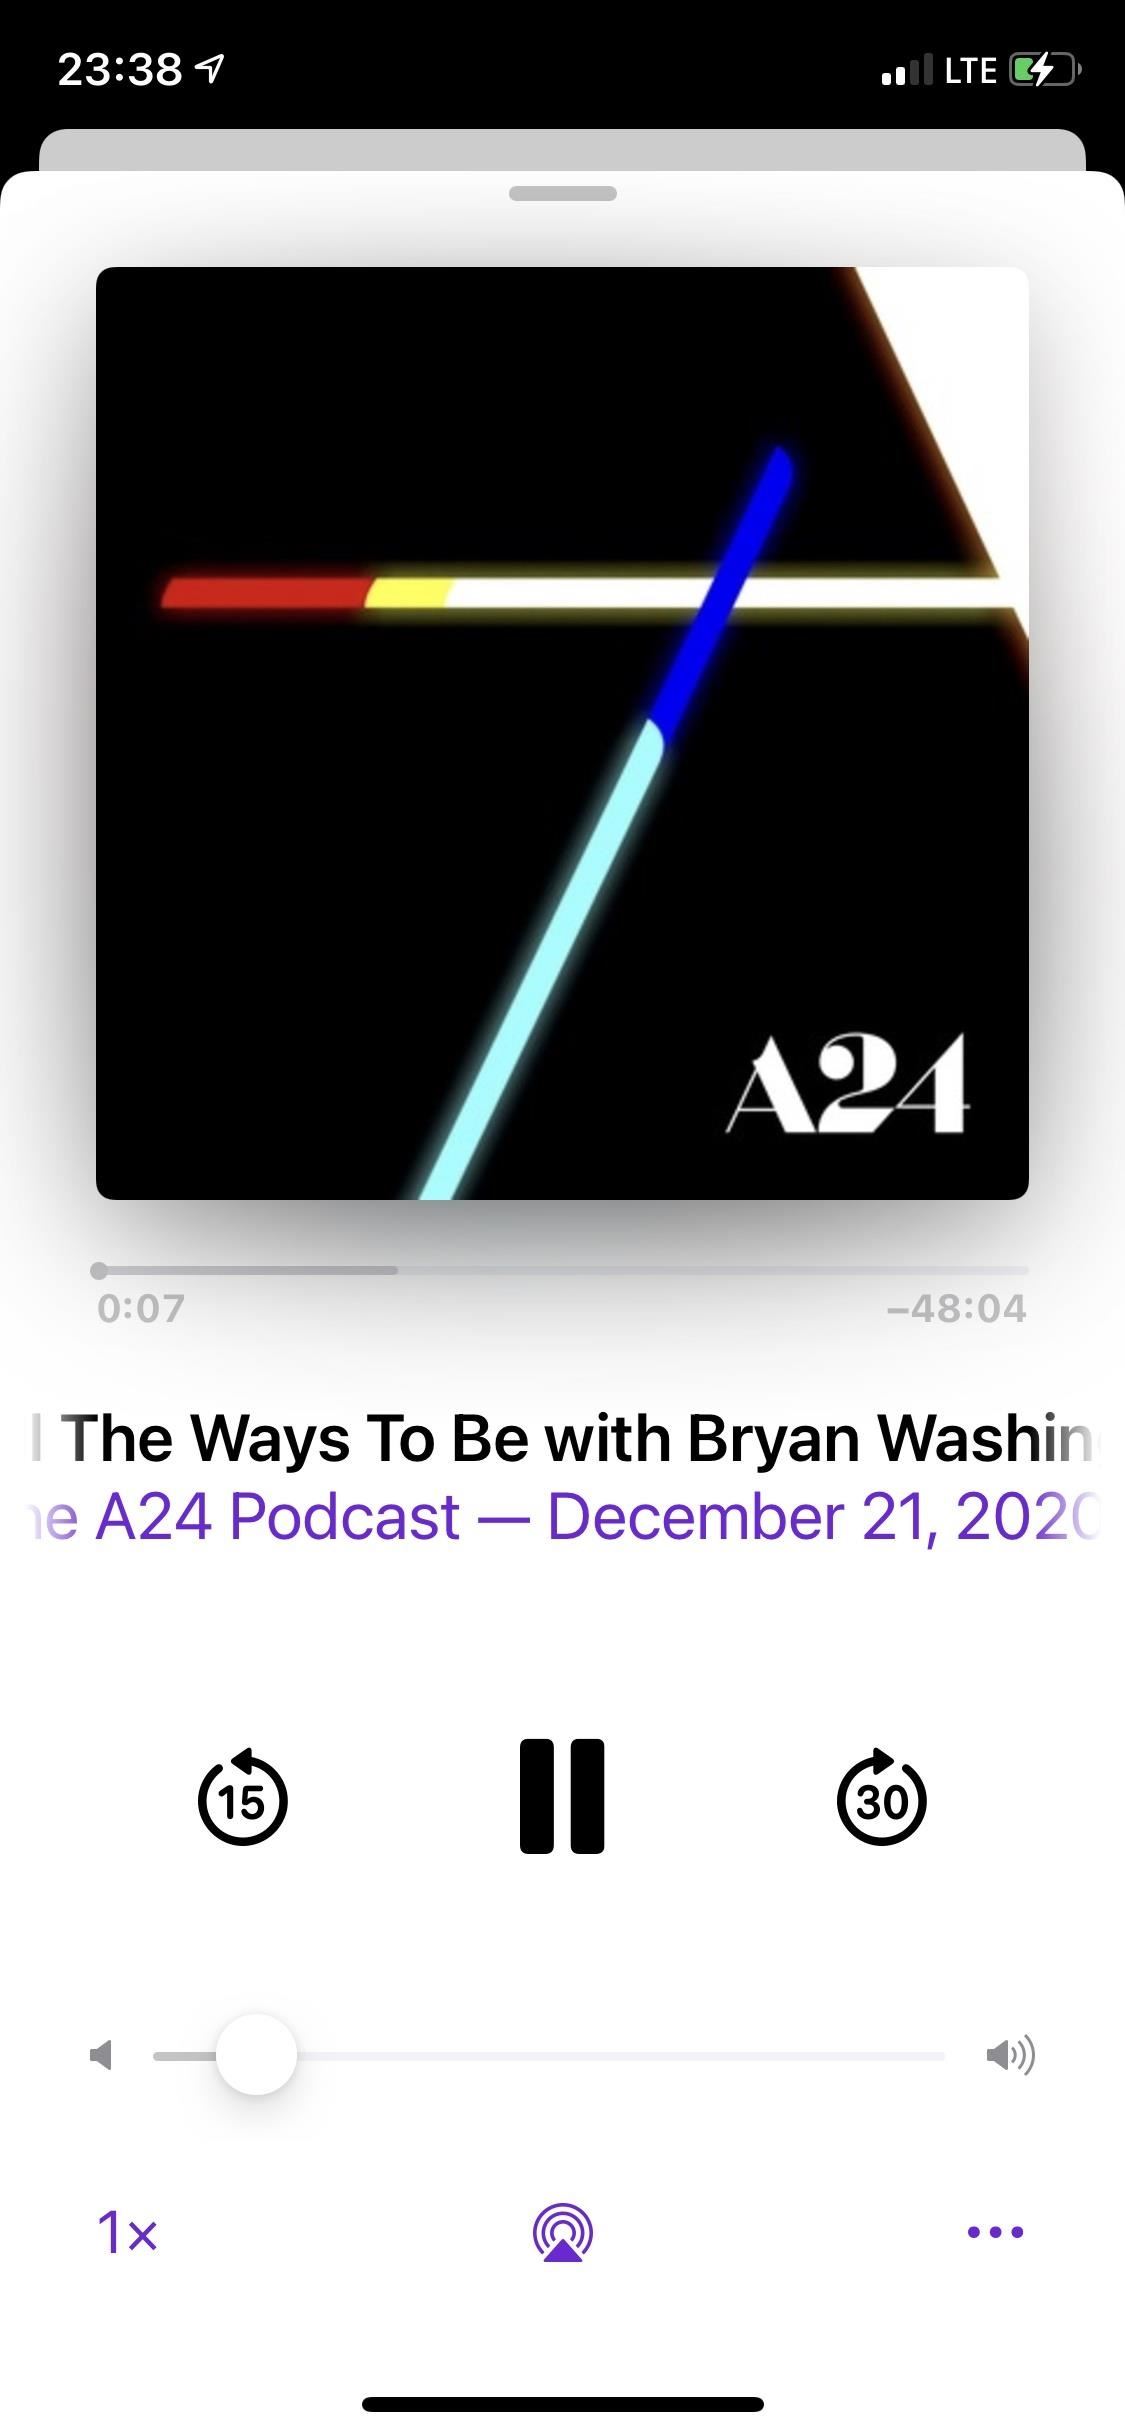 Auto-Play New Podcast Episodes on Your iPhone When Connecting Headphones, Starting a Trip, Tapping an NFC Tag & More